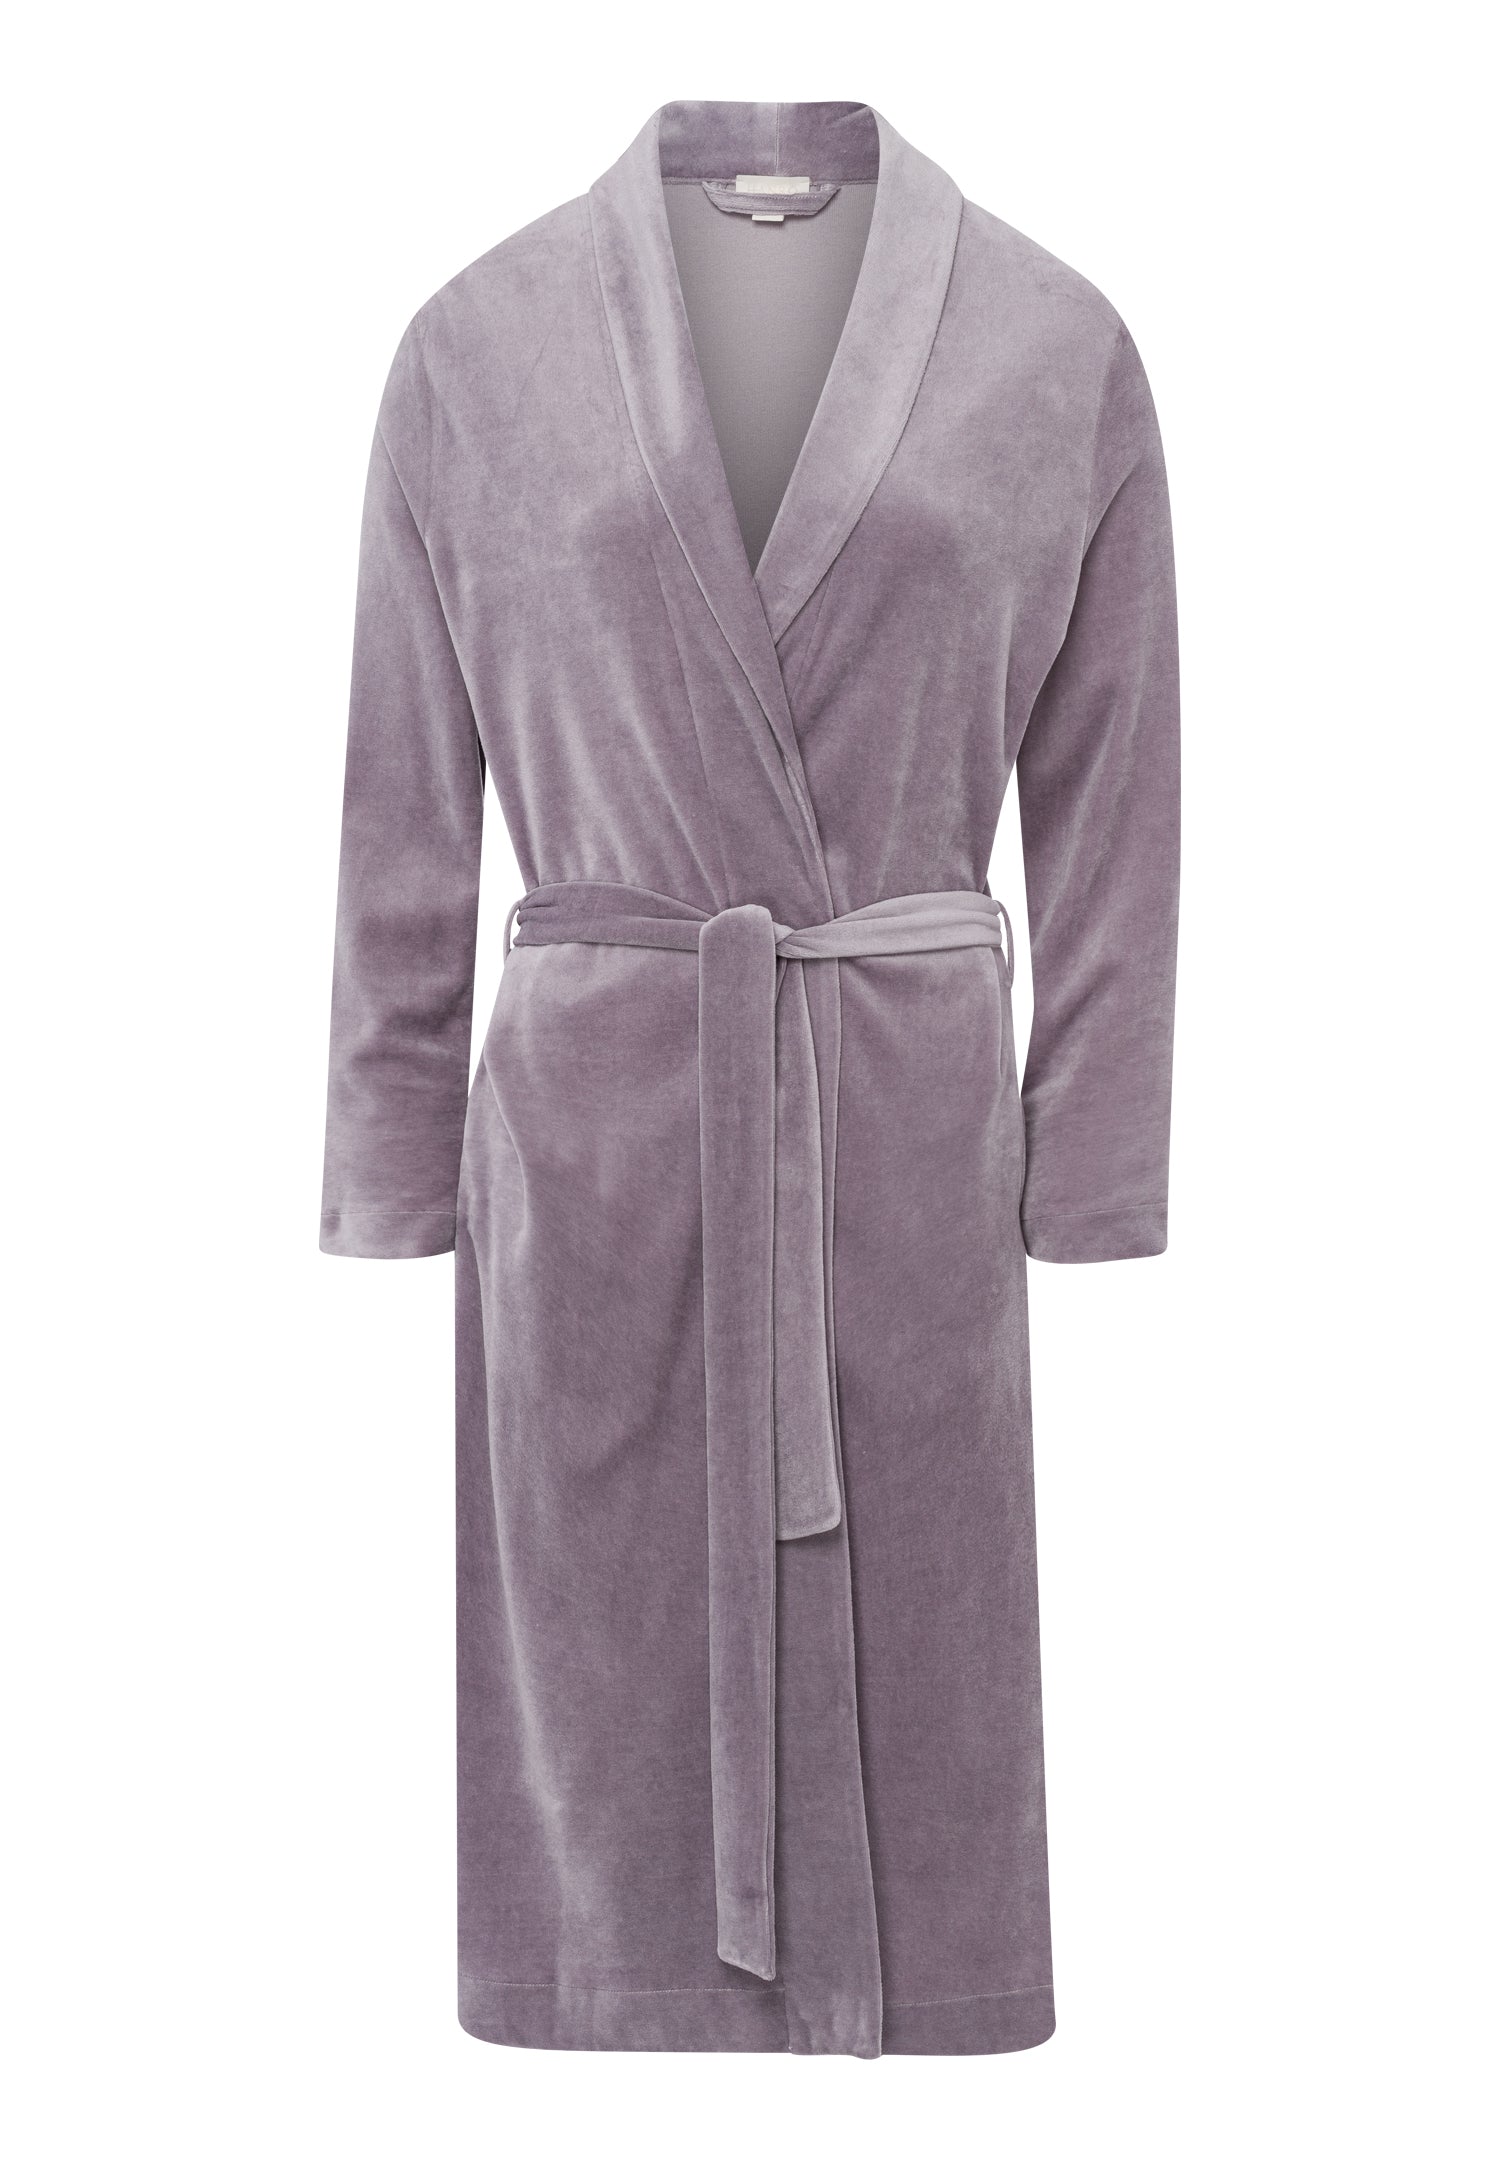 78695 Favourites Robe - 1487 Orchid